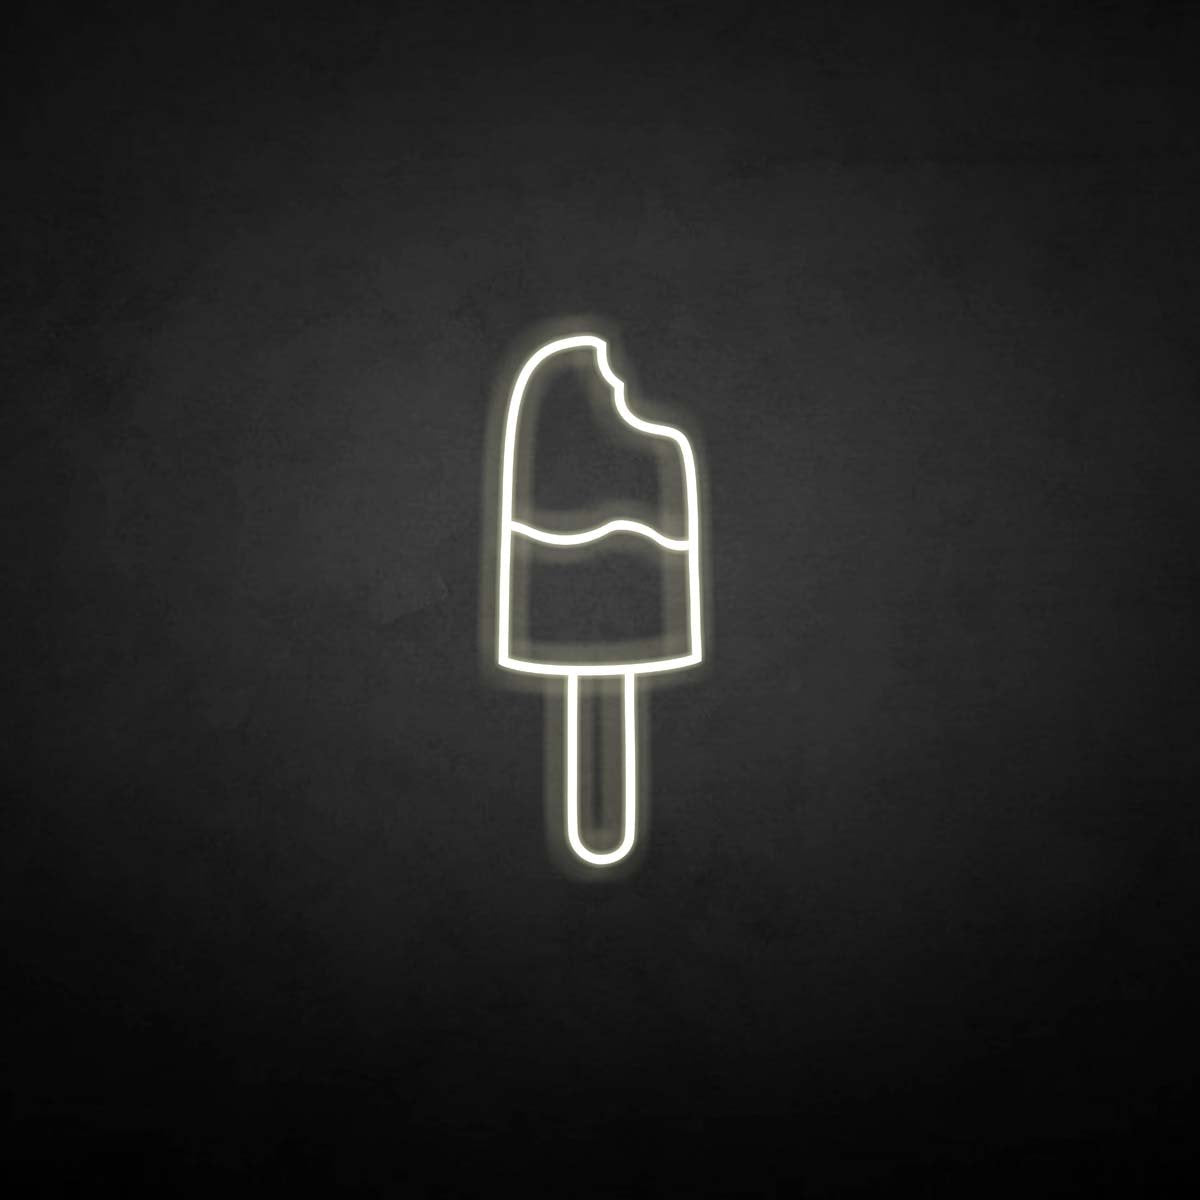 'popsicle' neon sign